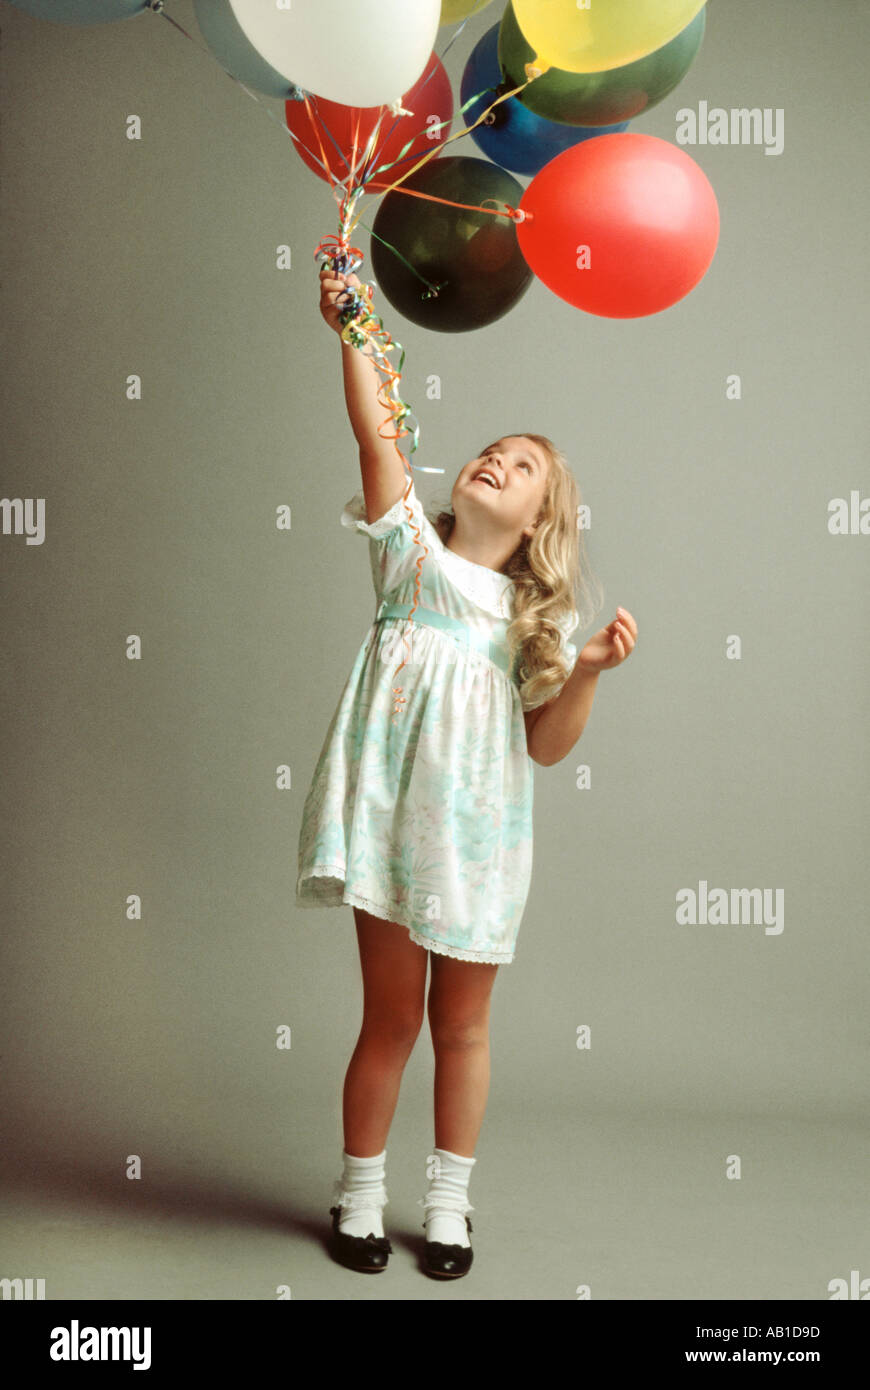 Young girl holding bunch of balloons Stock Photo